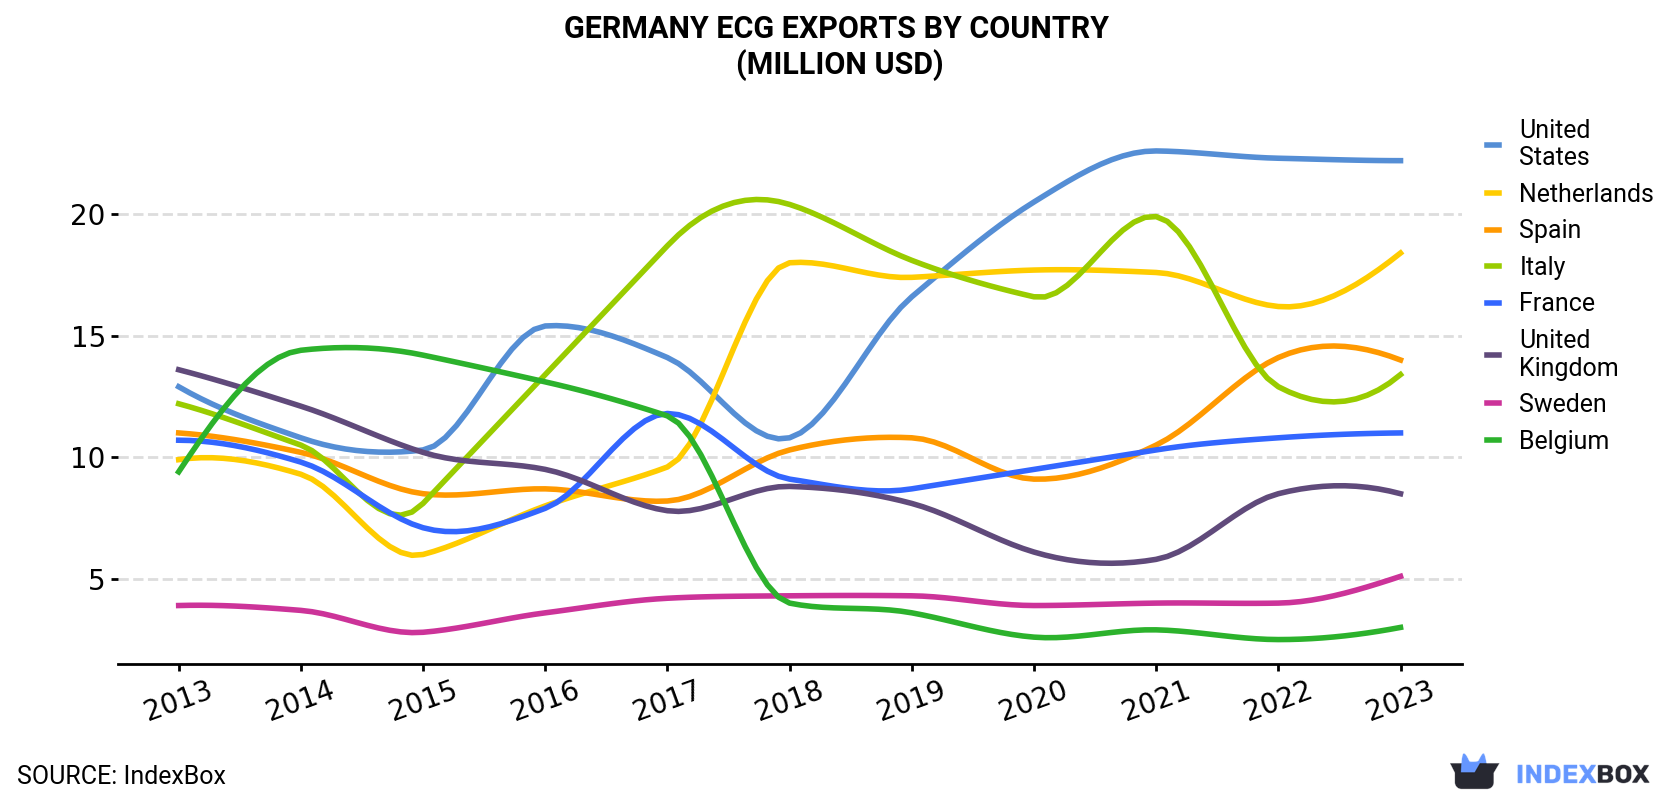 Germany ECG Exports By Country (Million USD)